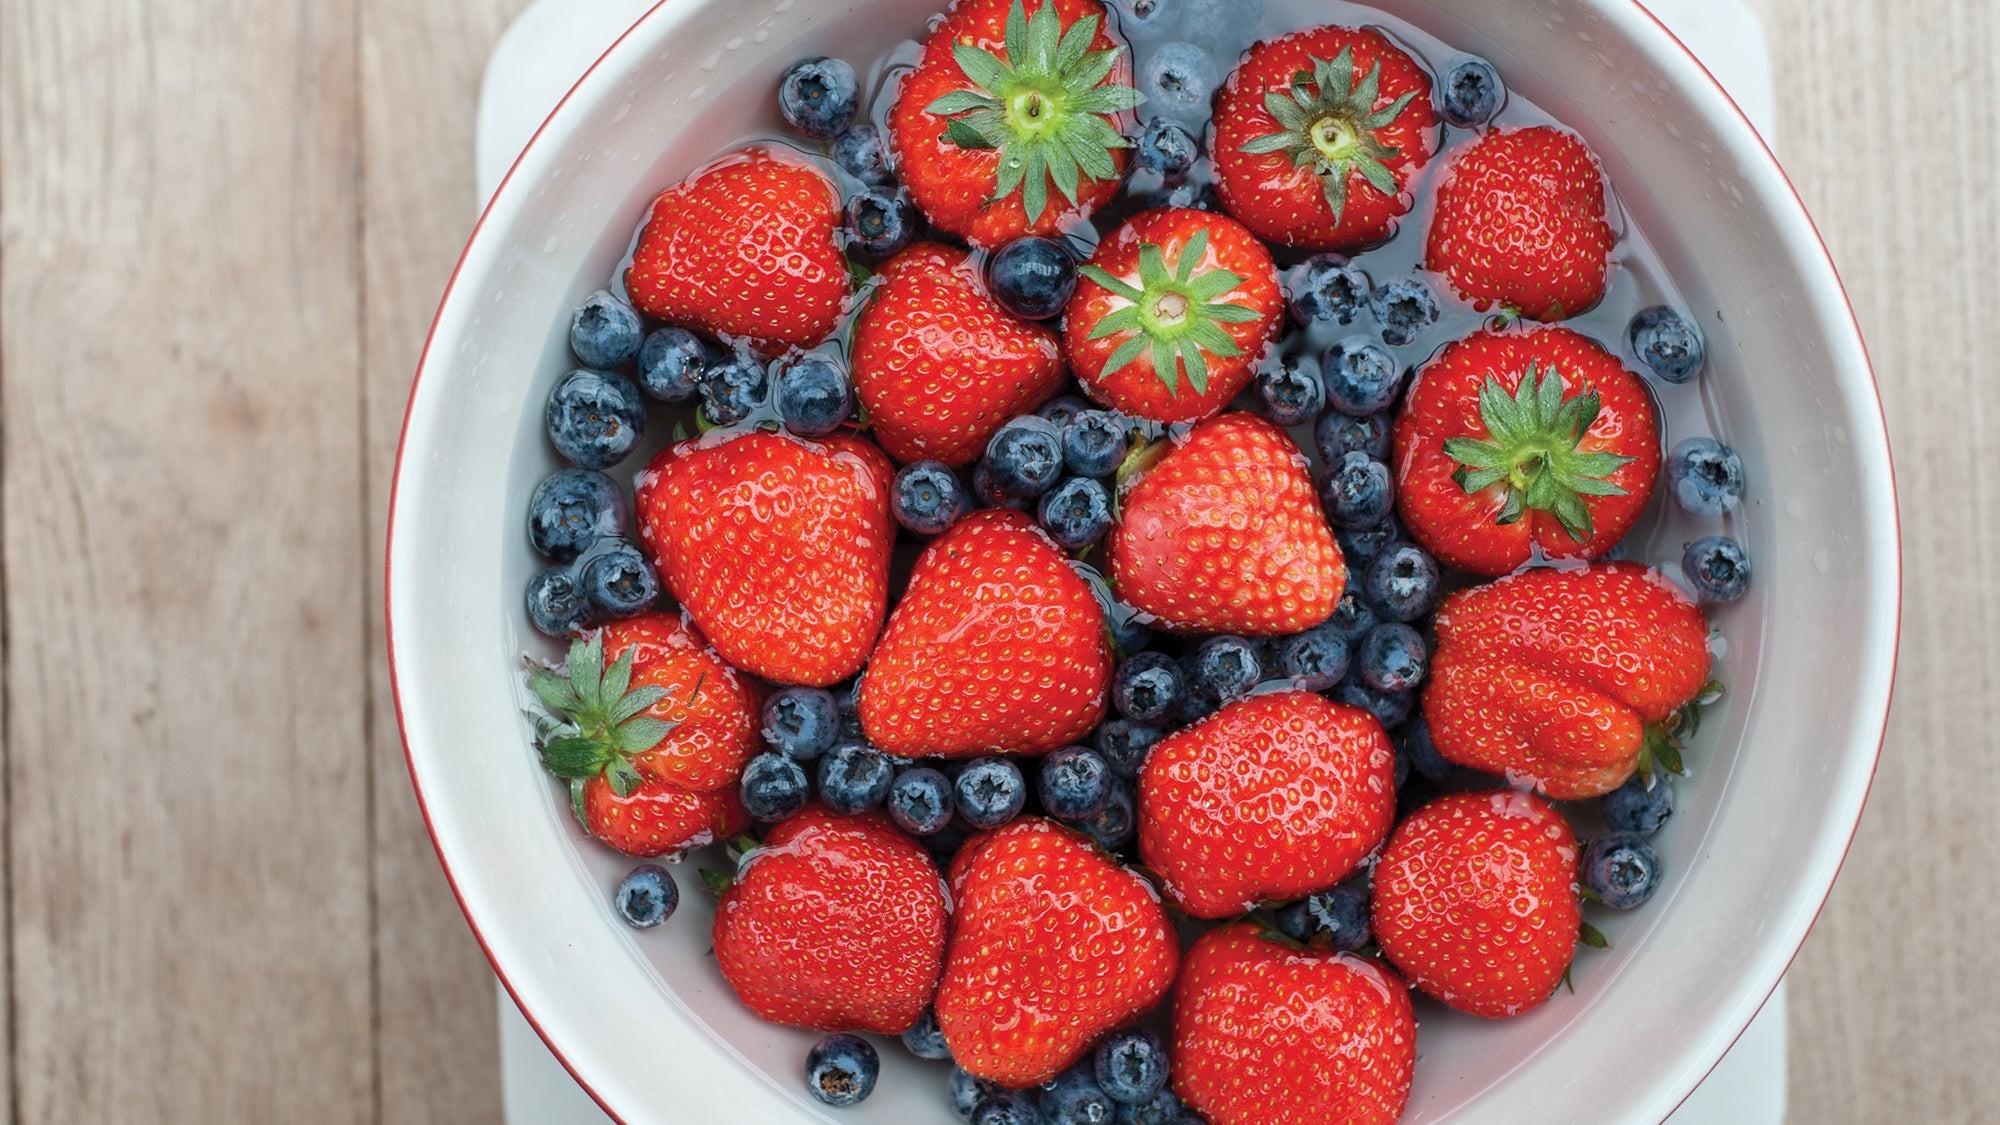 Our Definitive Guide to Washing Fresh Fruit